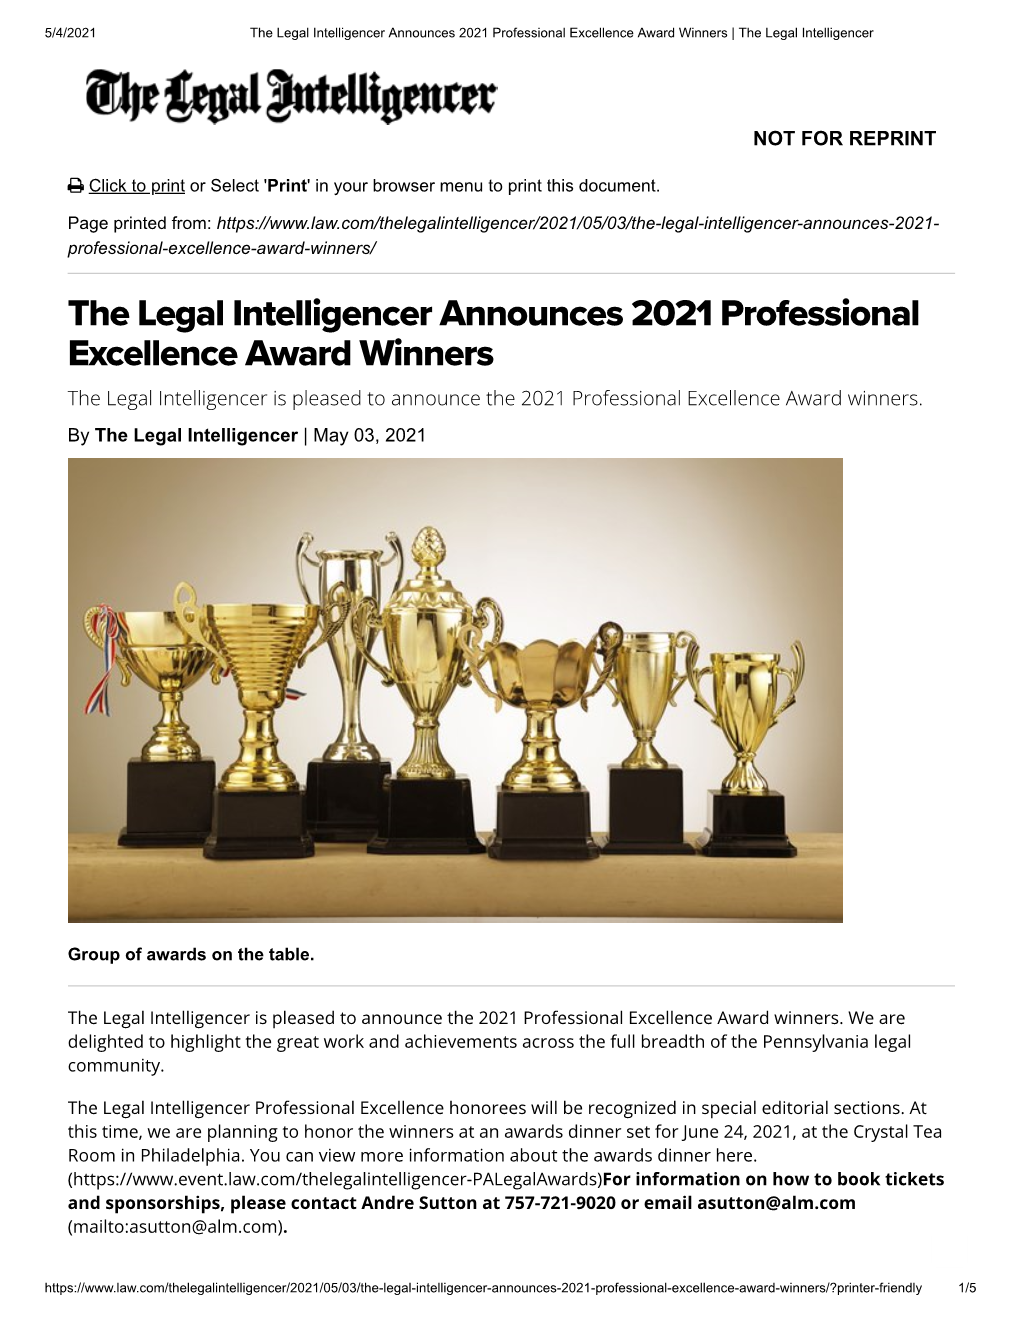 The Legal Intelligencer's Professional Excellence Awards